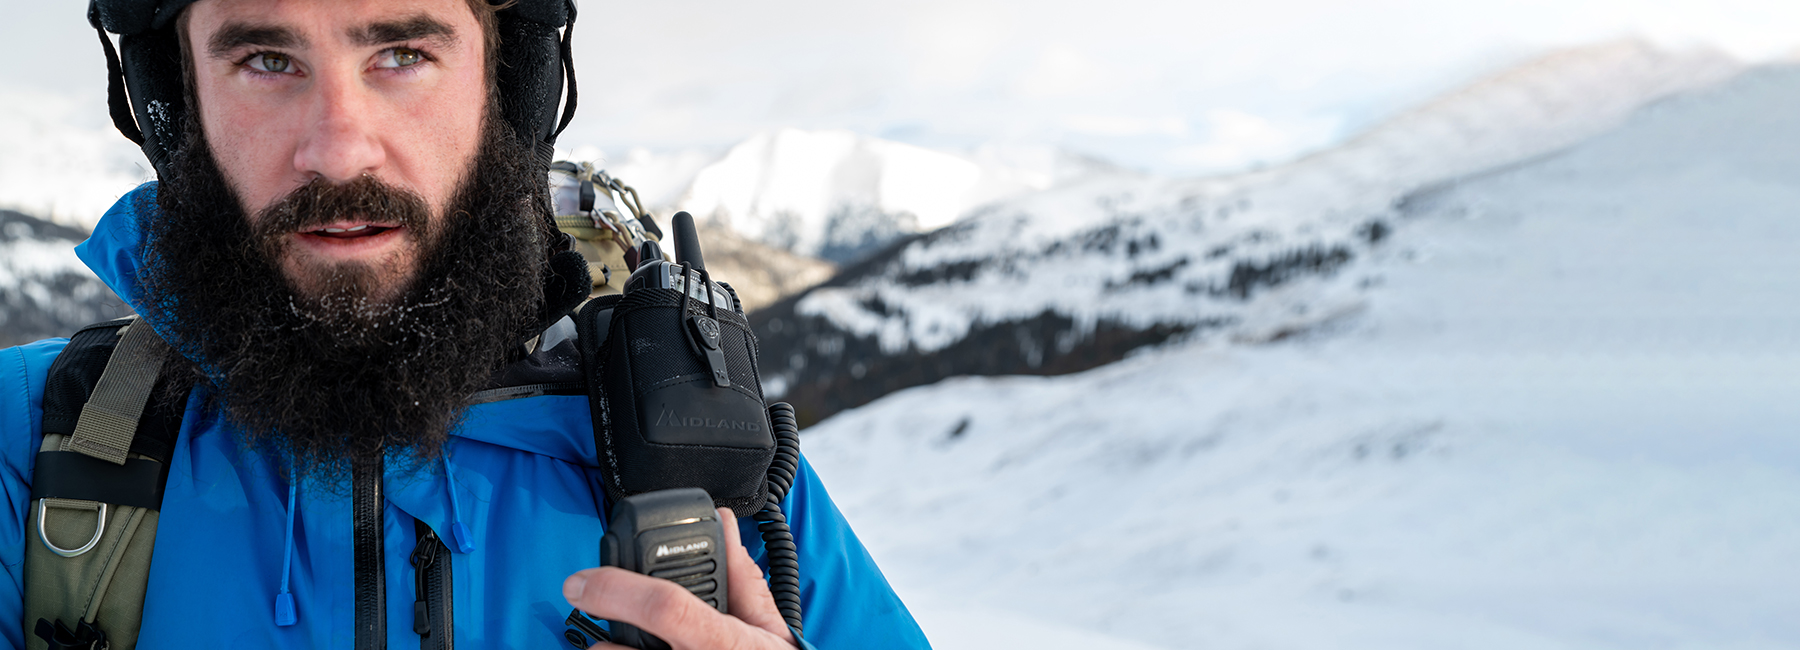 4 Best Walkie Talkies for the Mountains